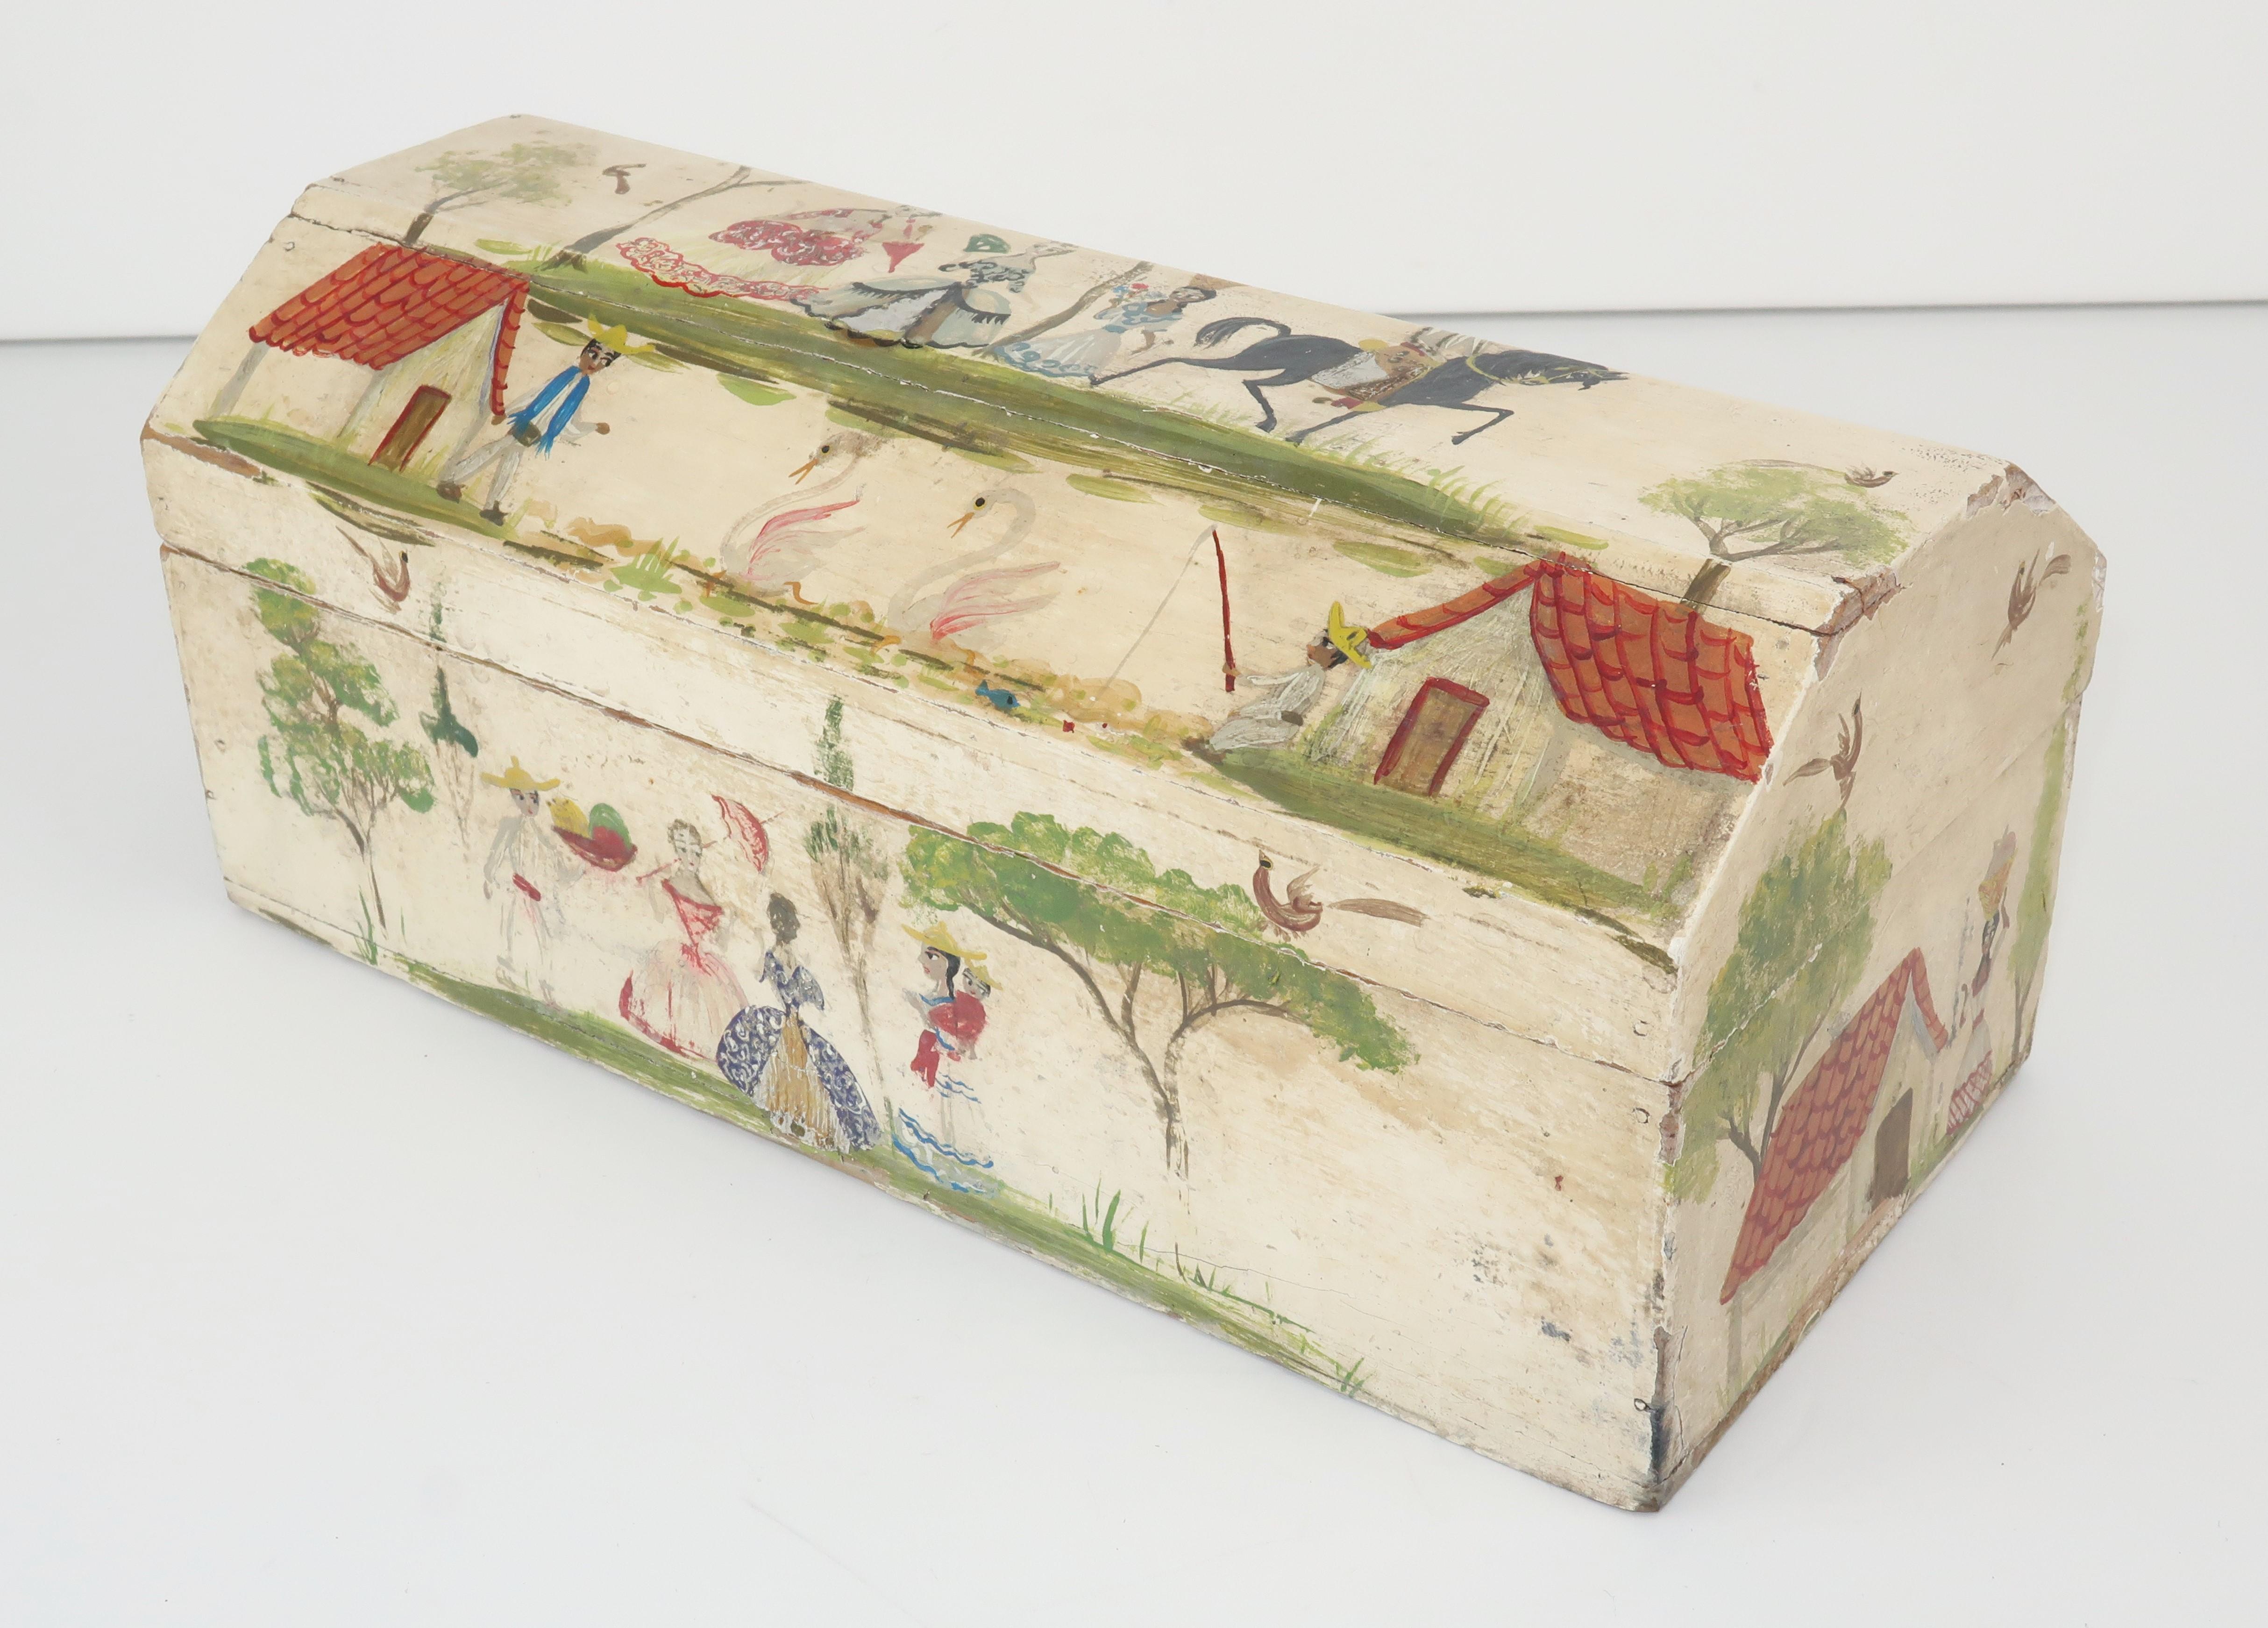 This charming tabletop wood box is the work of self taught Mexican artist Salvador Corona who stared his career as an artist after suffering a bullfight injury in the early 1900's. He gained a reputation for creating countryside scenes depicting